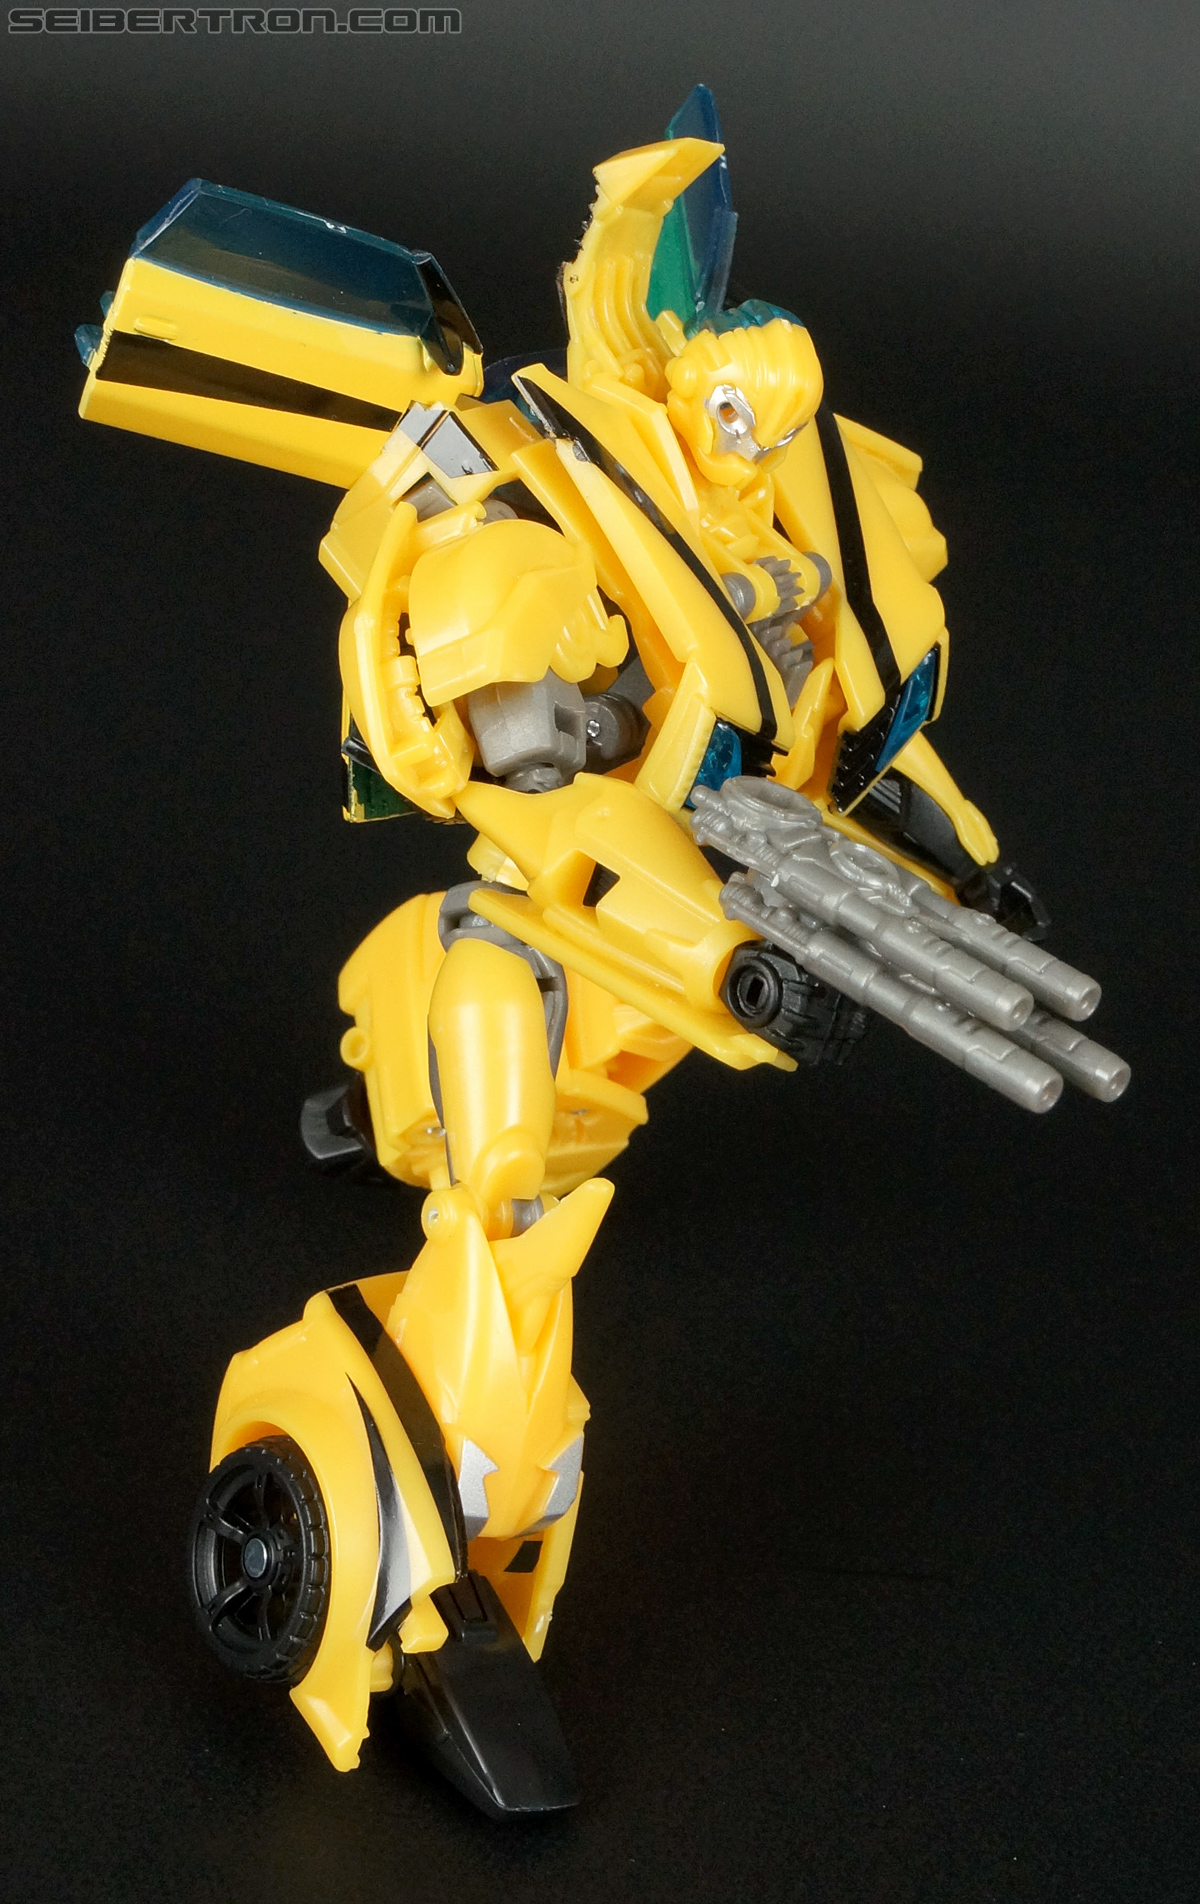 Transformers Prime: Robots In Disguise Bumblebee (Image #104 of 165)